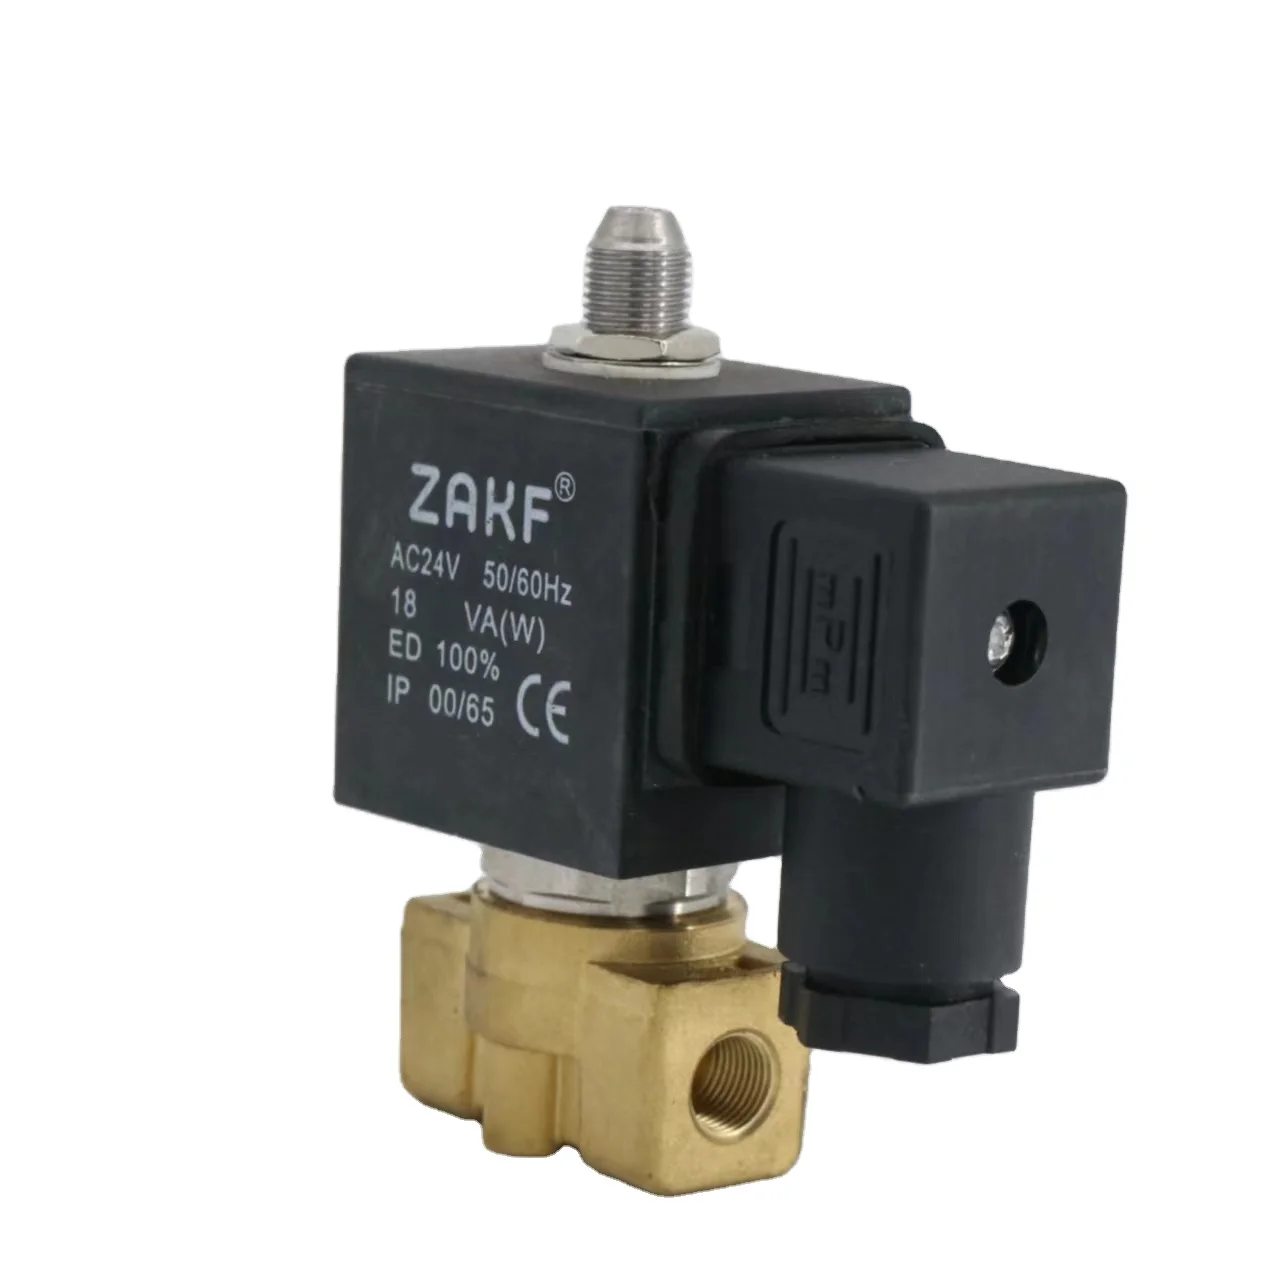 

China Manufacture AC24V solenoid valve price parts compressors for air air compressor